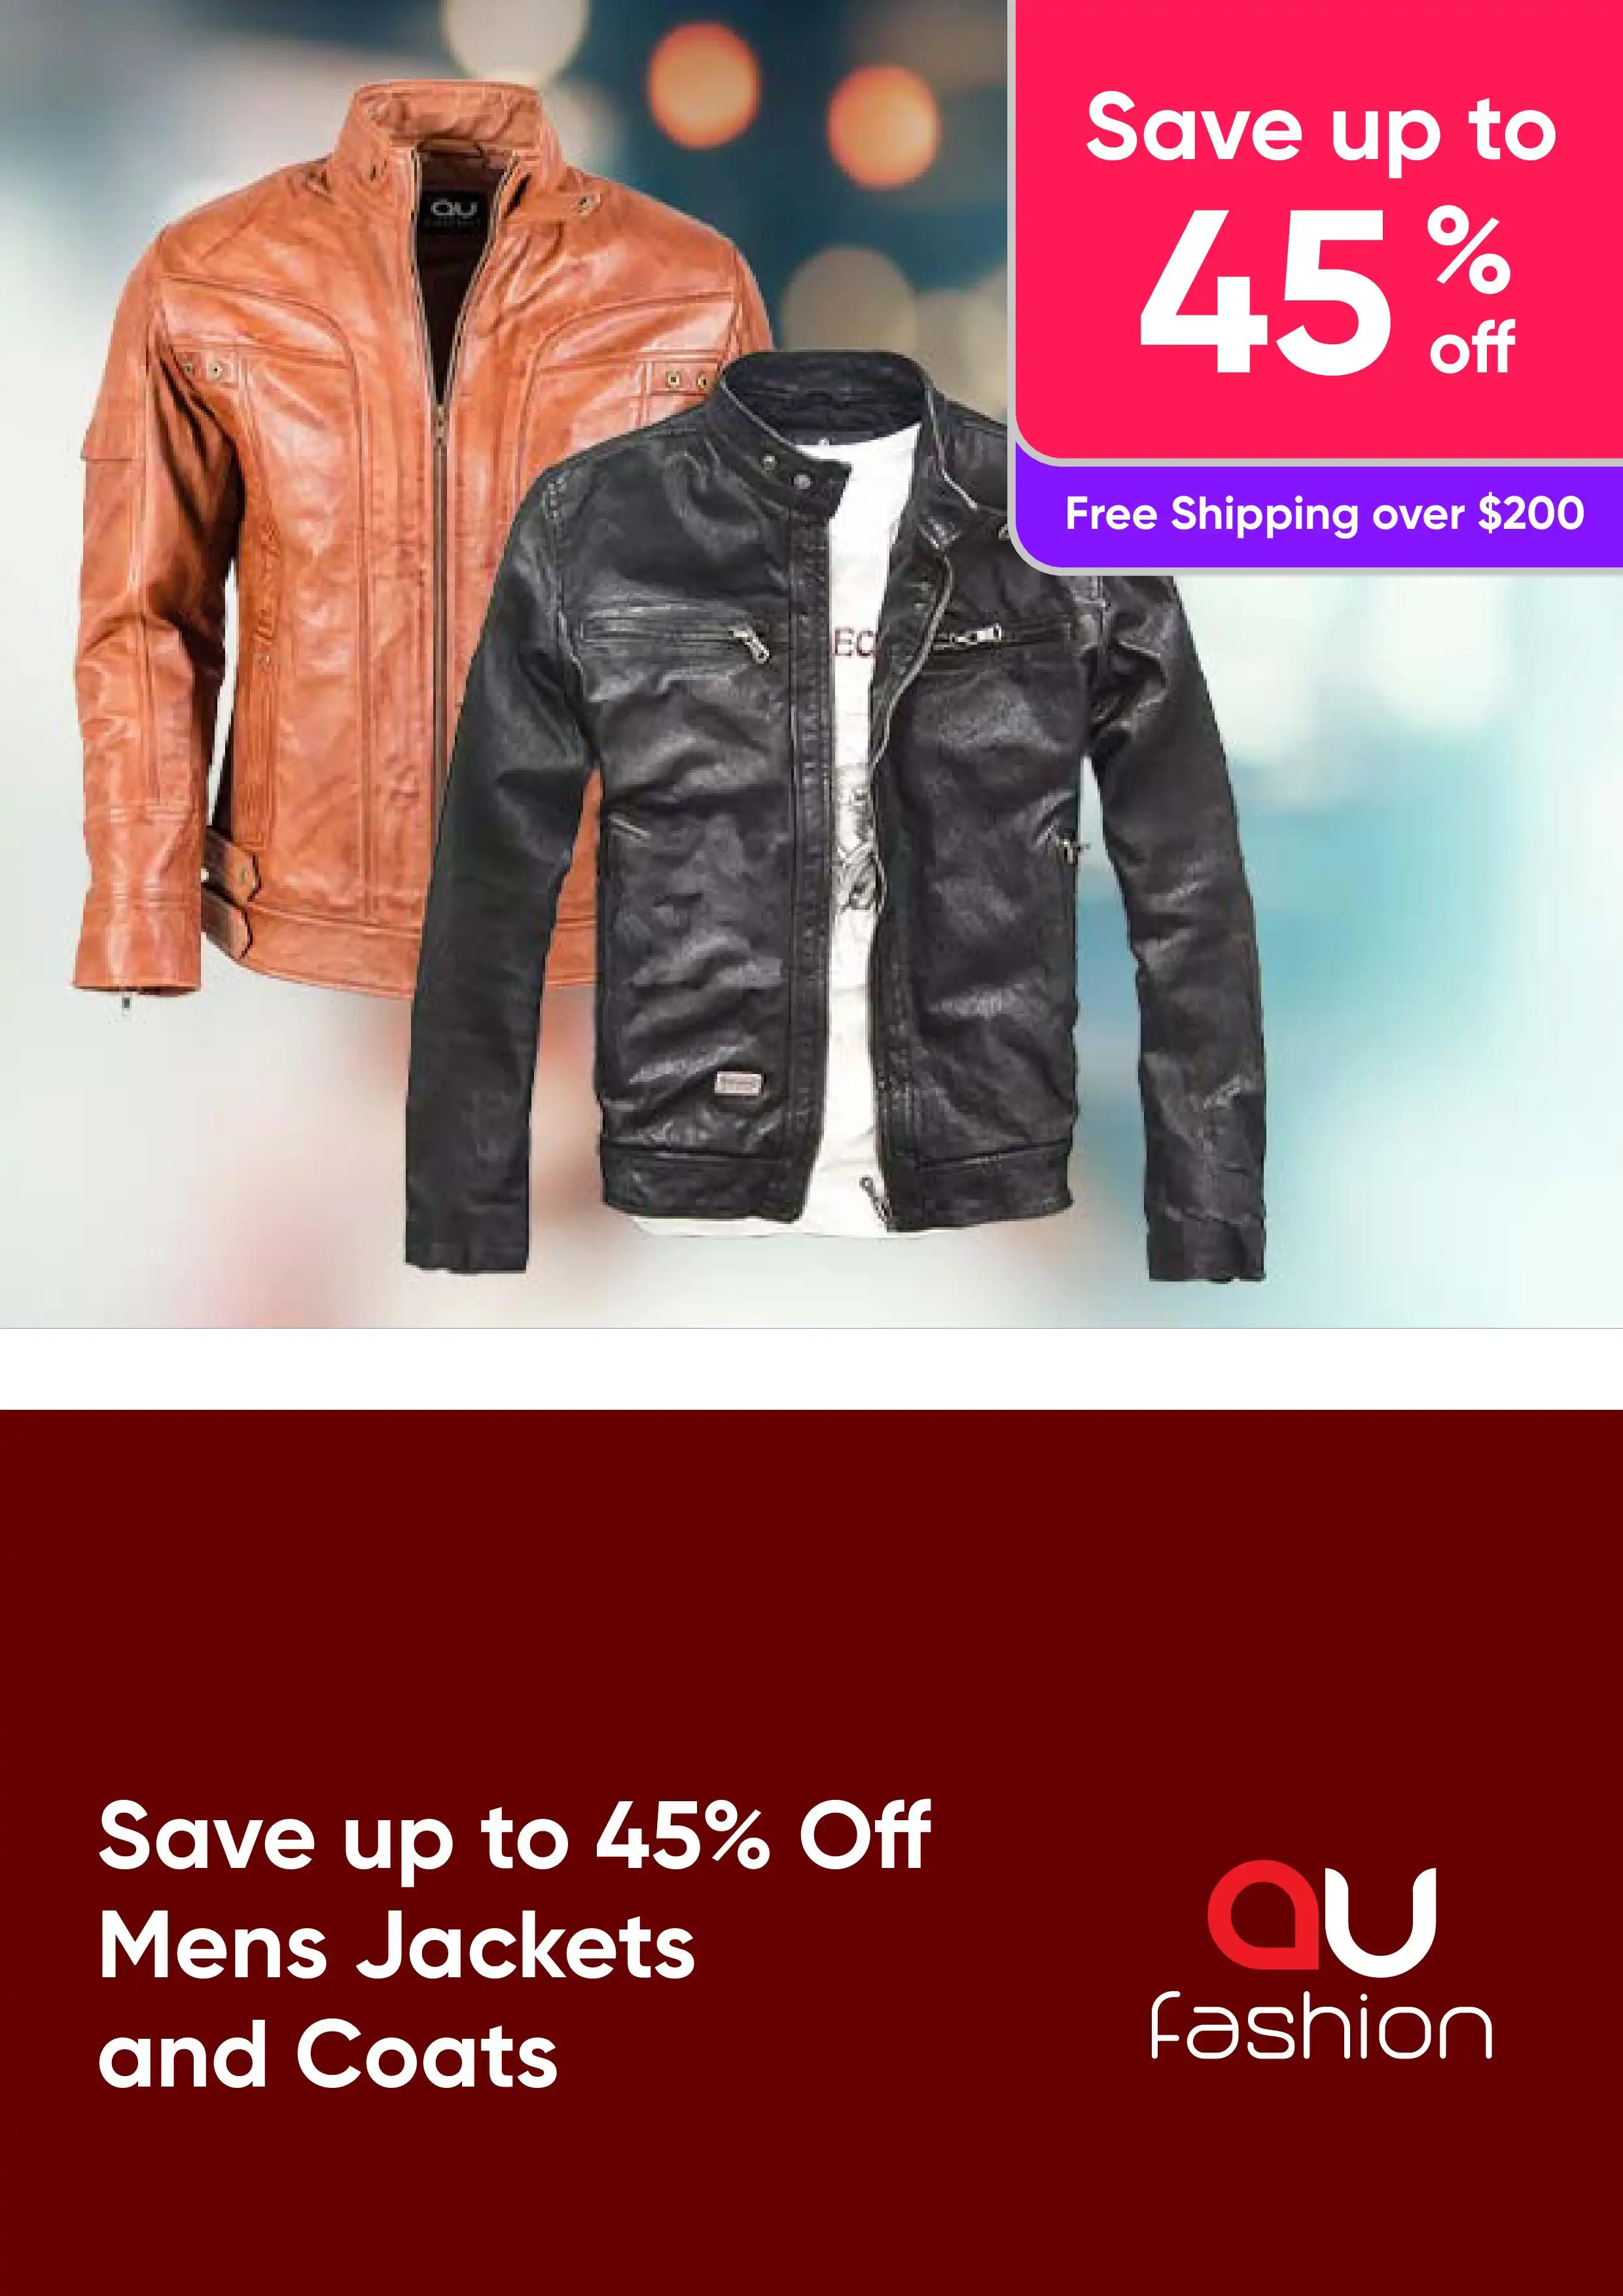 Up to 45% Off Mens Jackets and Coats